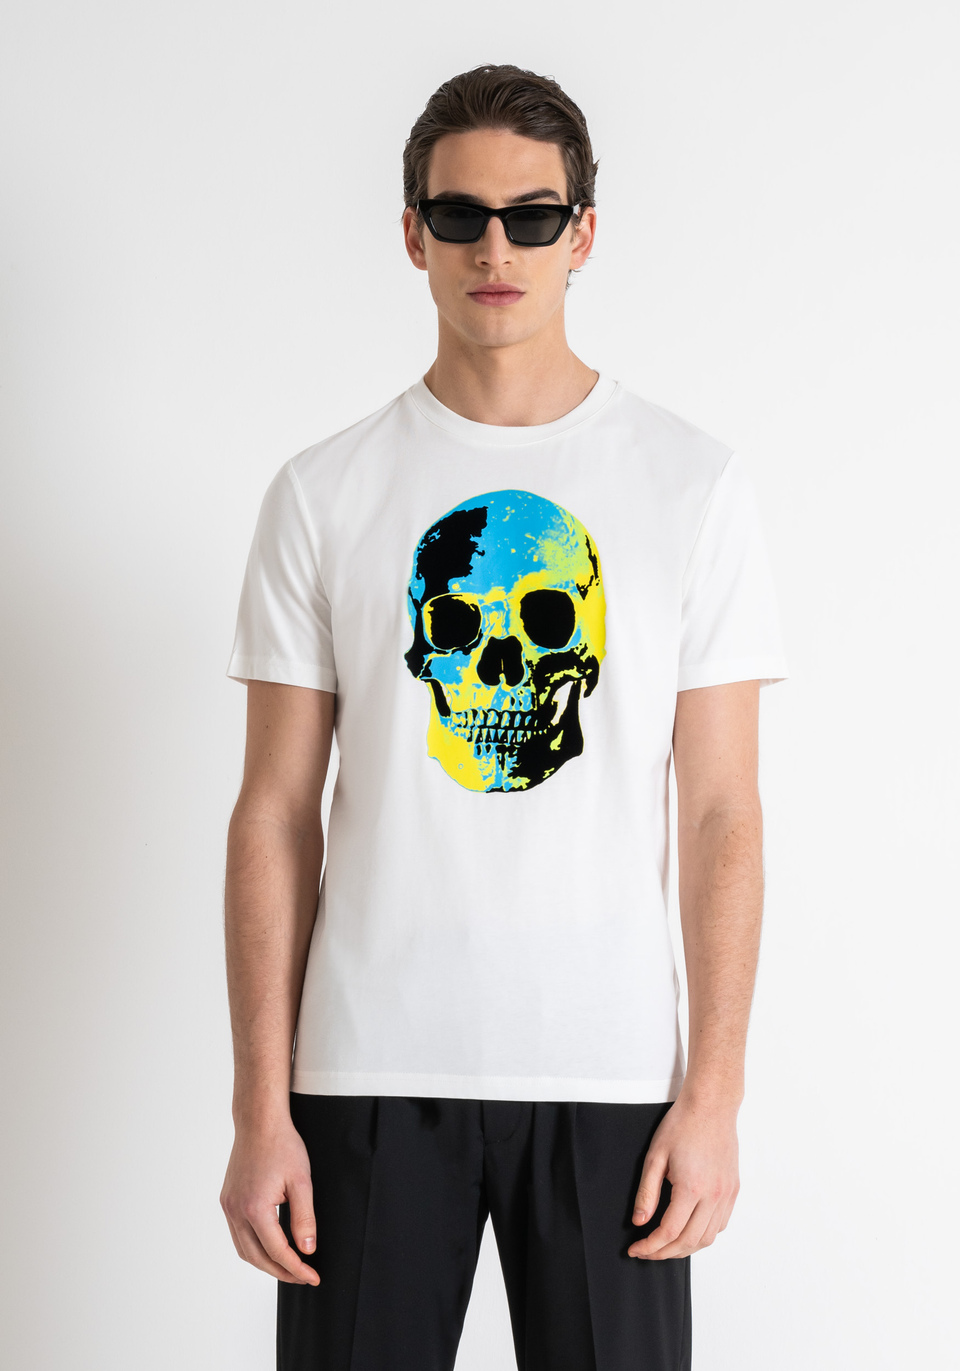 SLIM FIT T-SHIRT IN COTTON WITH SKULL PRINT - Antony Morato Online Shop